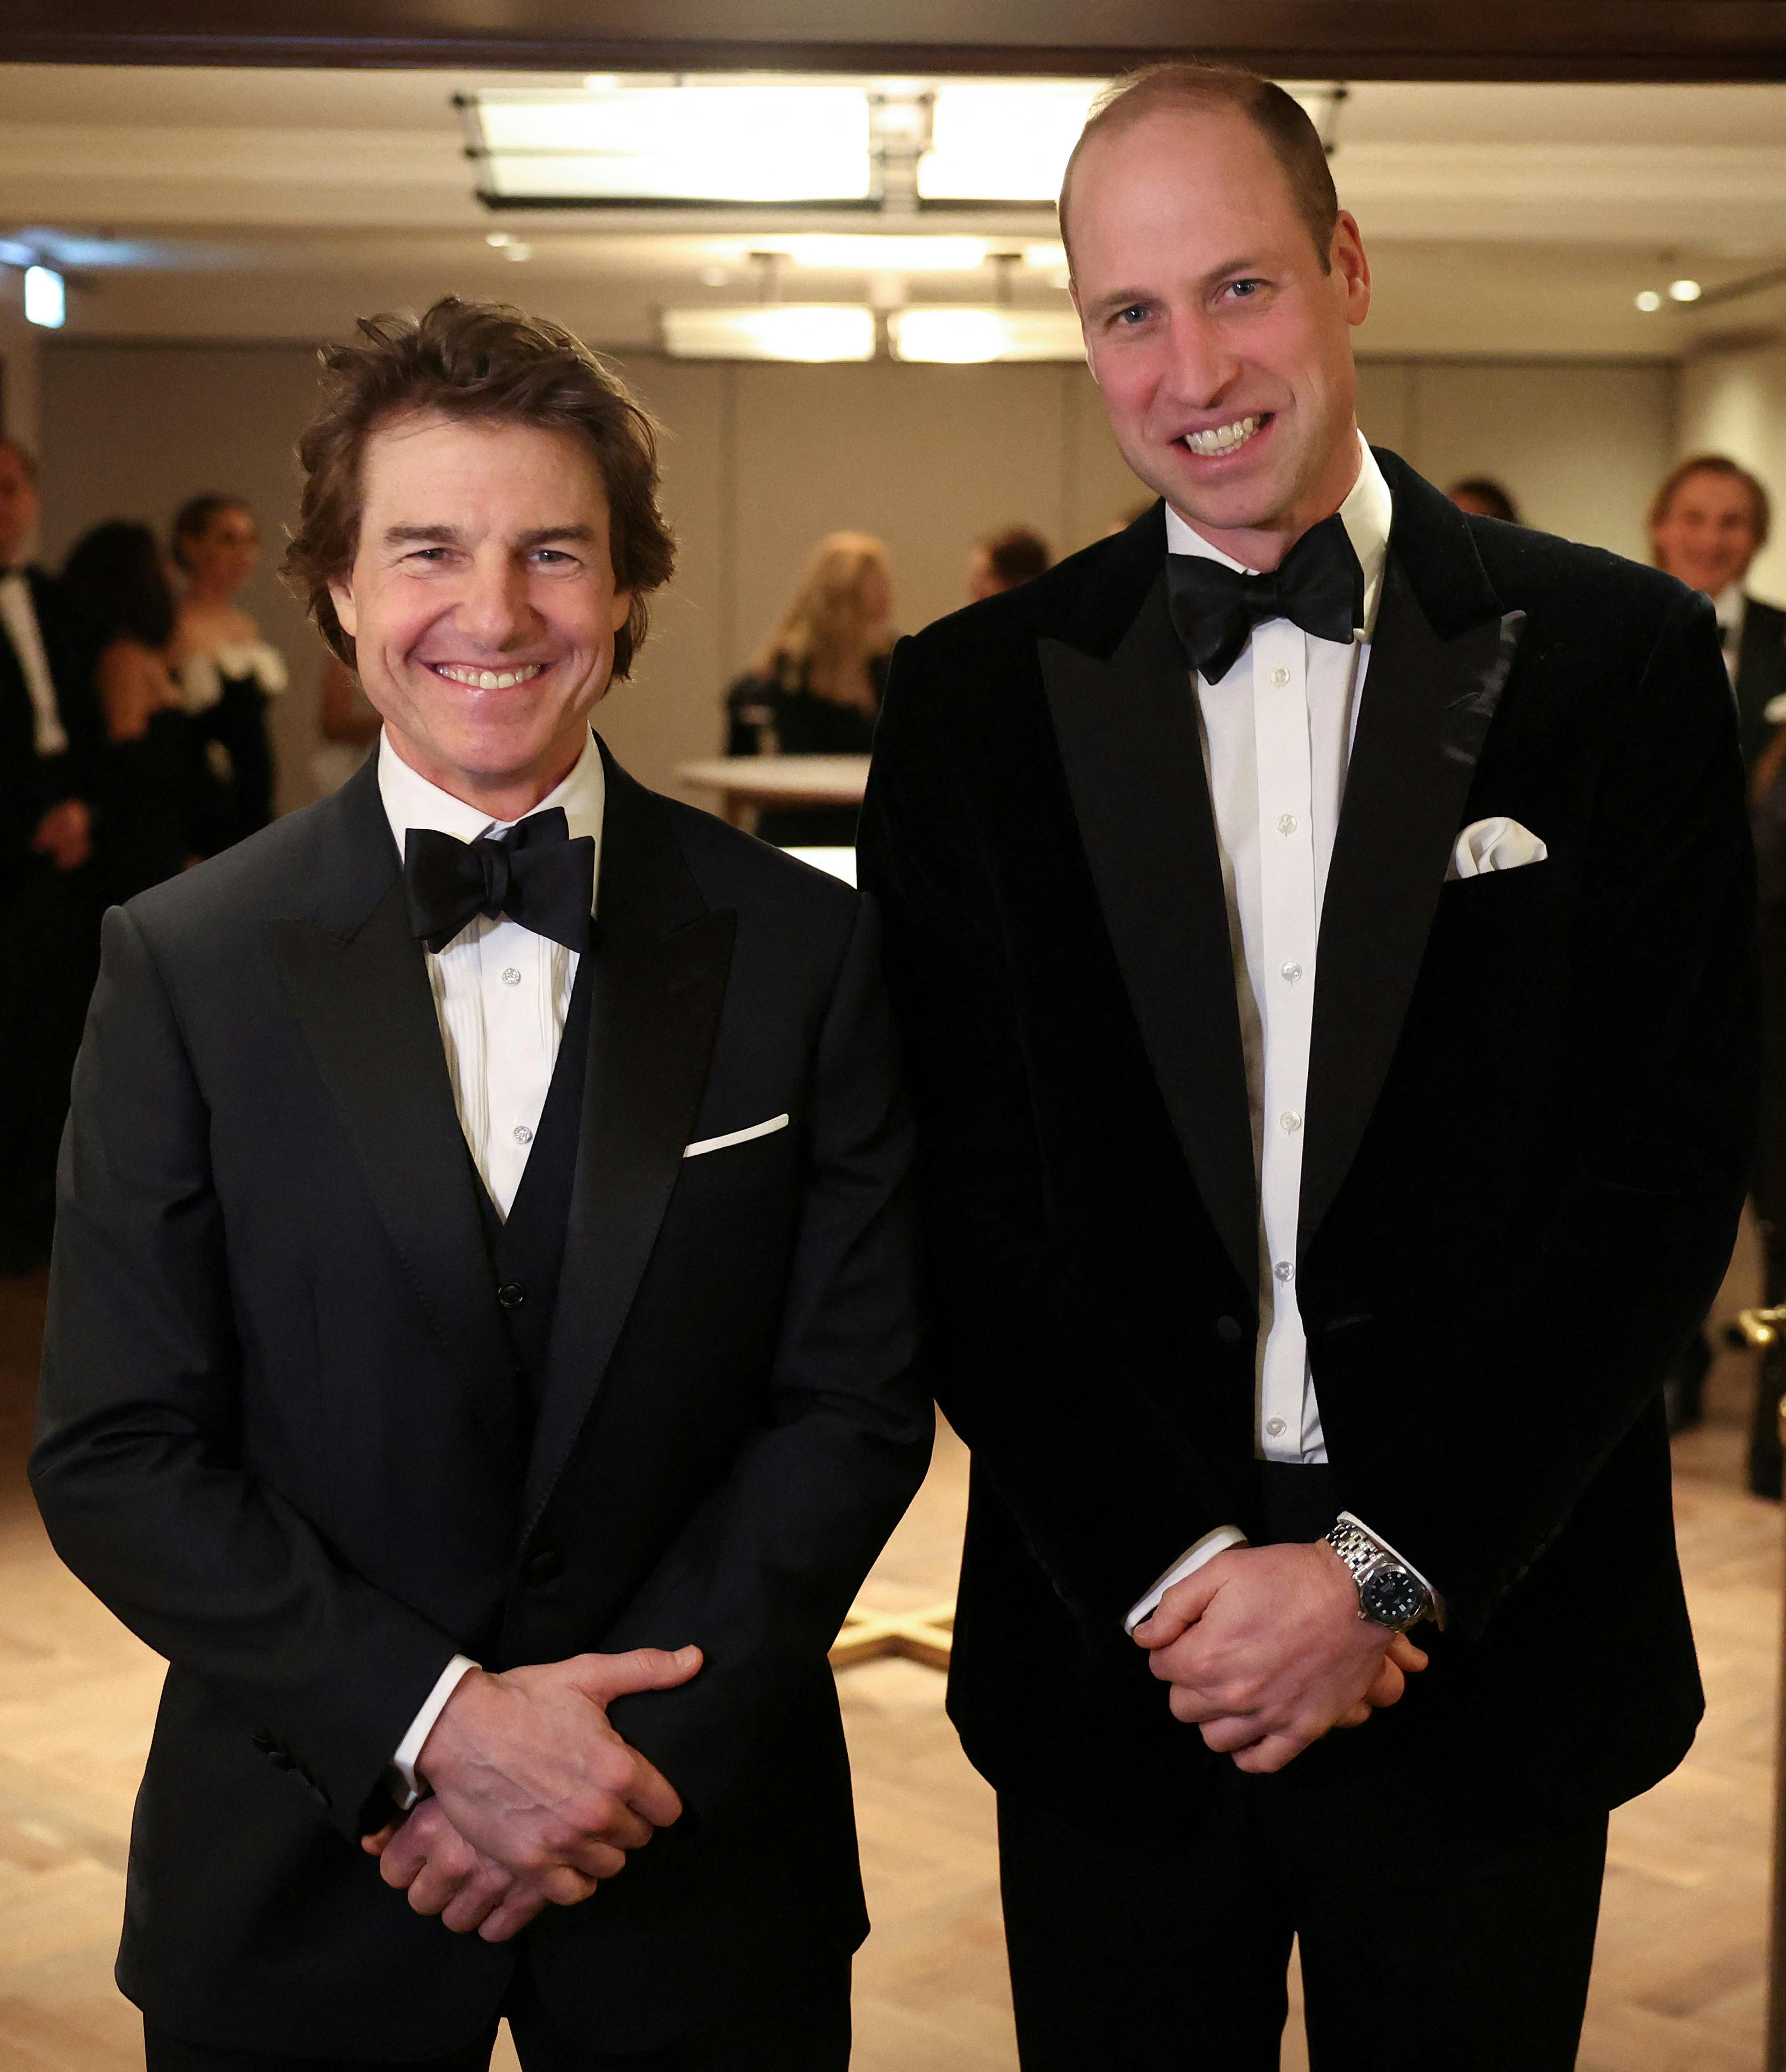 Britain's Prince William, Prince of Wales, poses for a photo with U.S. actor Tom Cruise, at the London Air Ambulance Charity Gala Dinner at The OWO, in central London, Britain, February 7, 2024. DANIEL LEAL/Pool via REUTERS